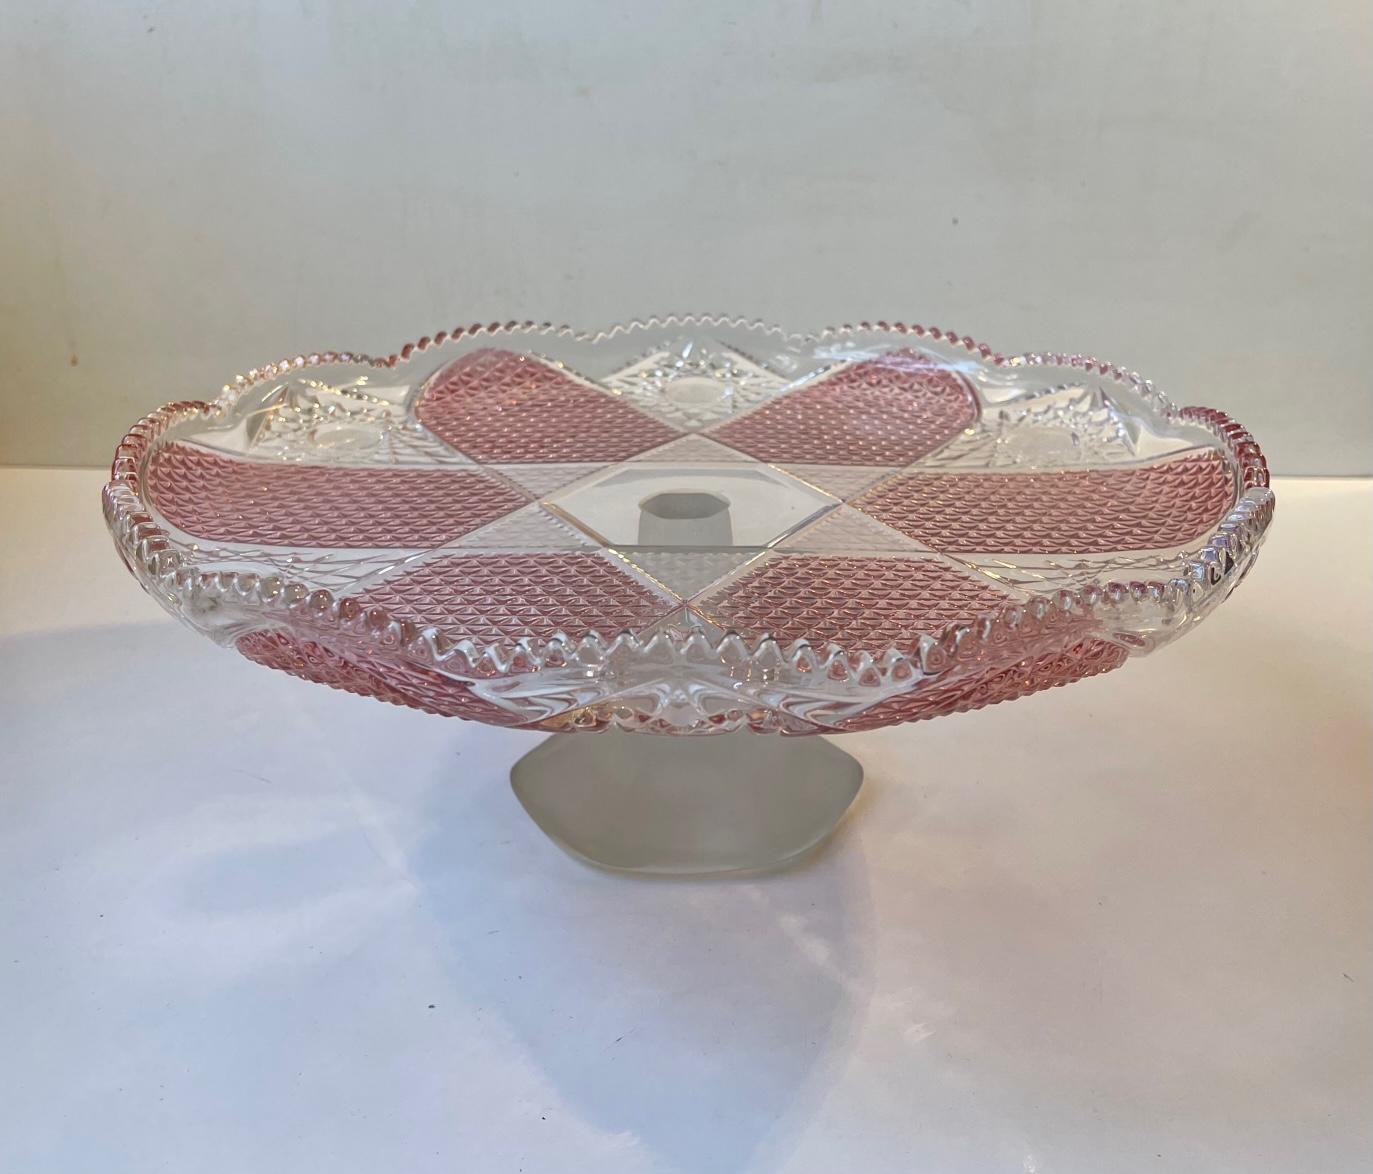 A large high quality crystal and glass cake stand. Heavy enough to support even the most intensely decorated cakes. Its foot is made from frosted solid glass. Feminin midcentury styling. Made in Bohemia/Czech Republic during the 1960s or 1970s.